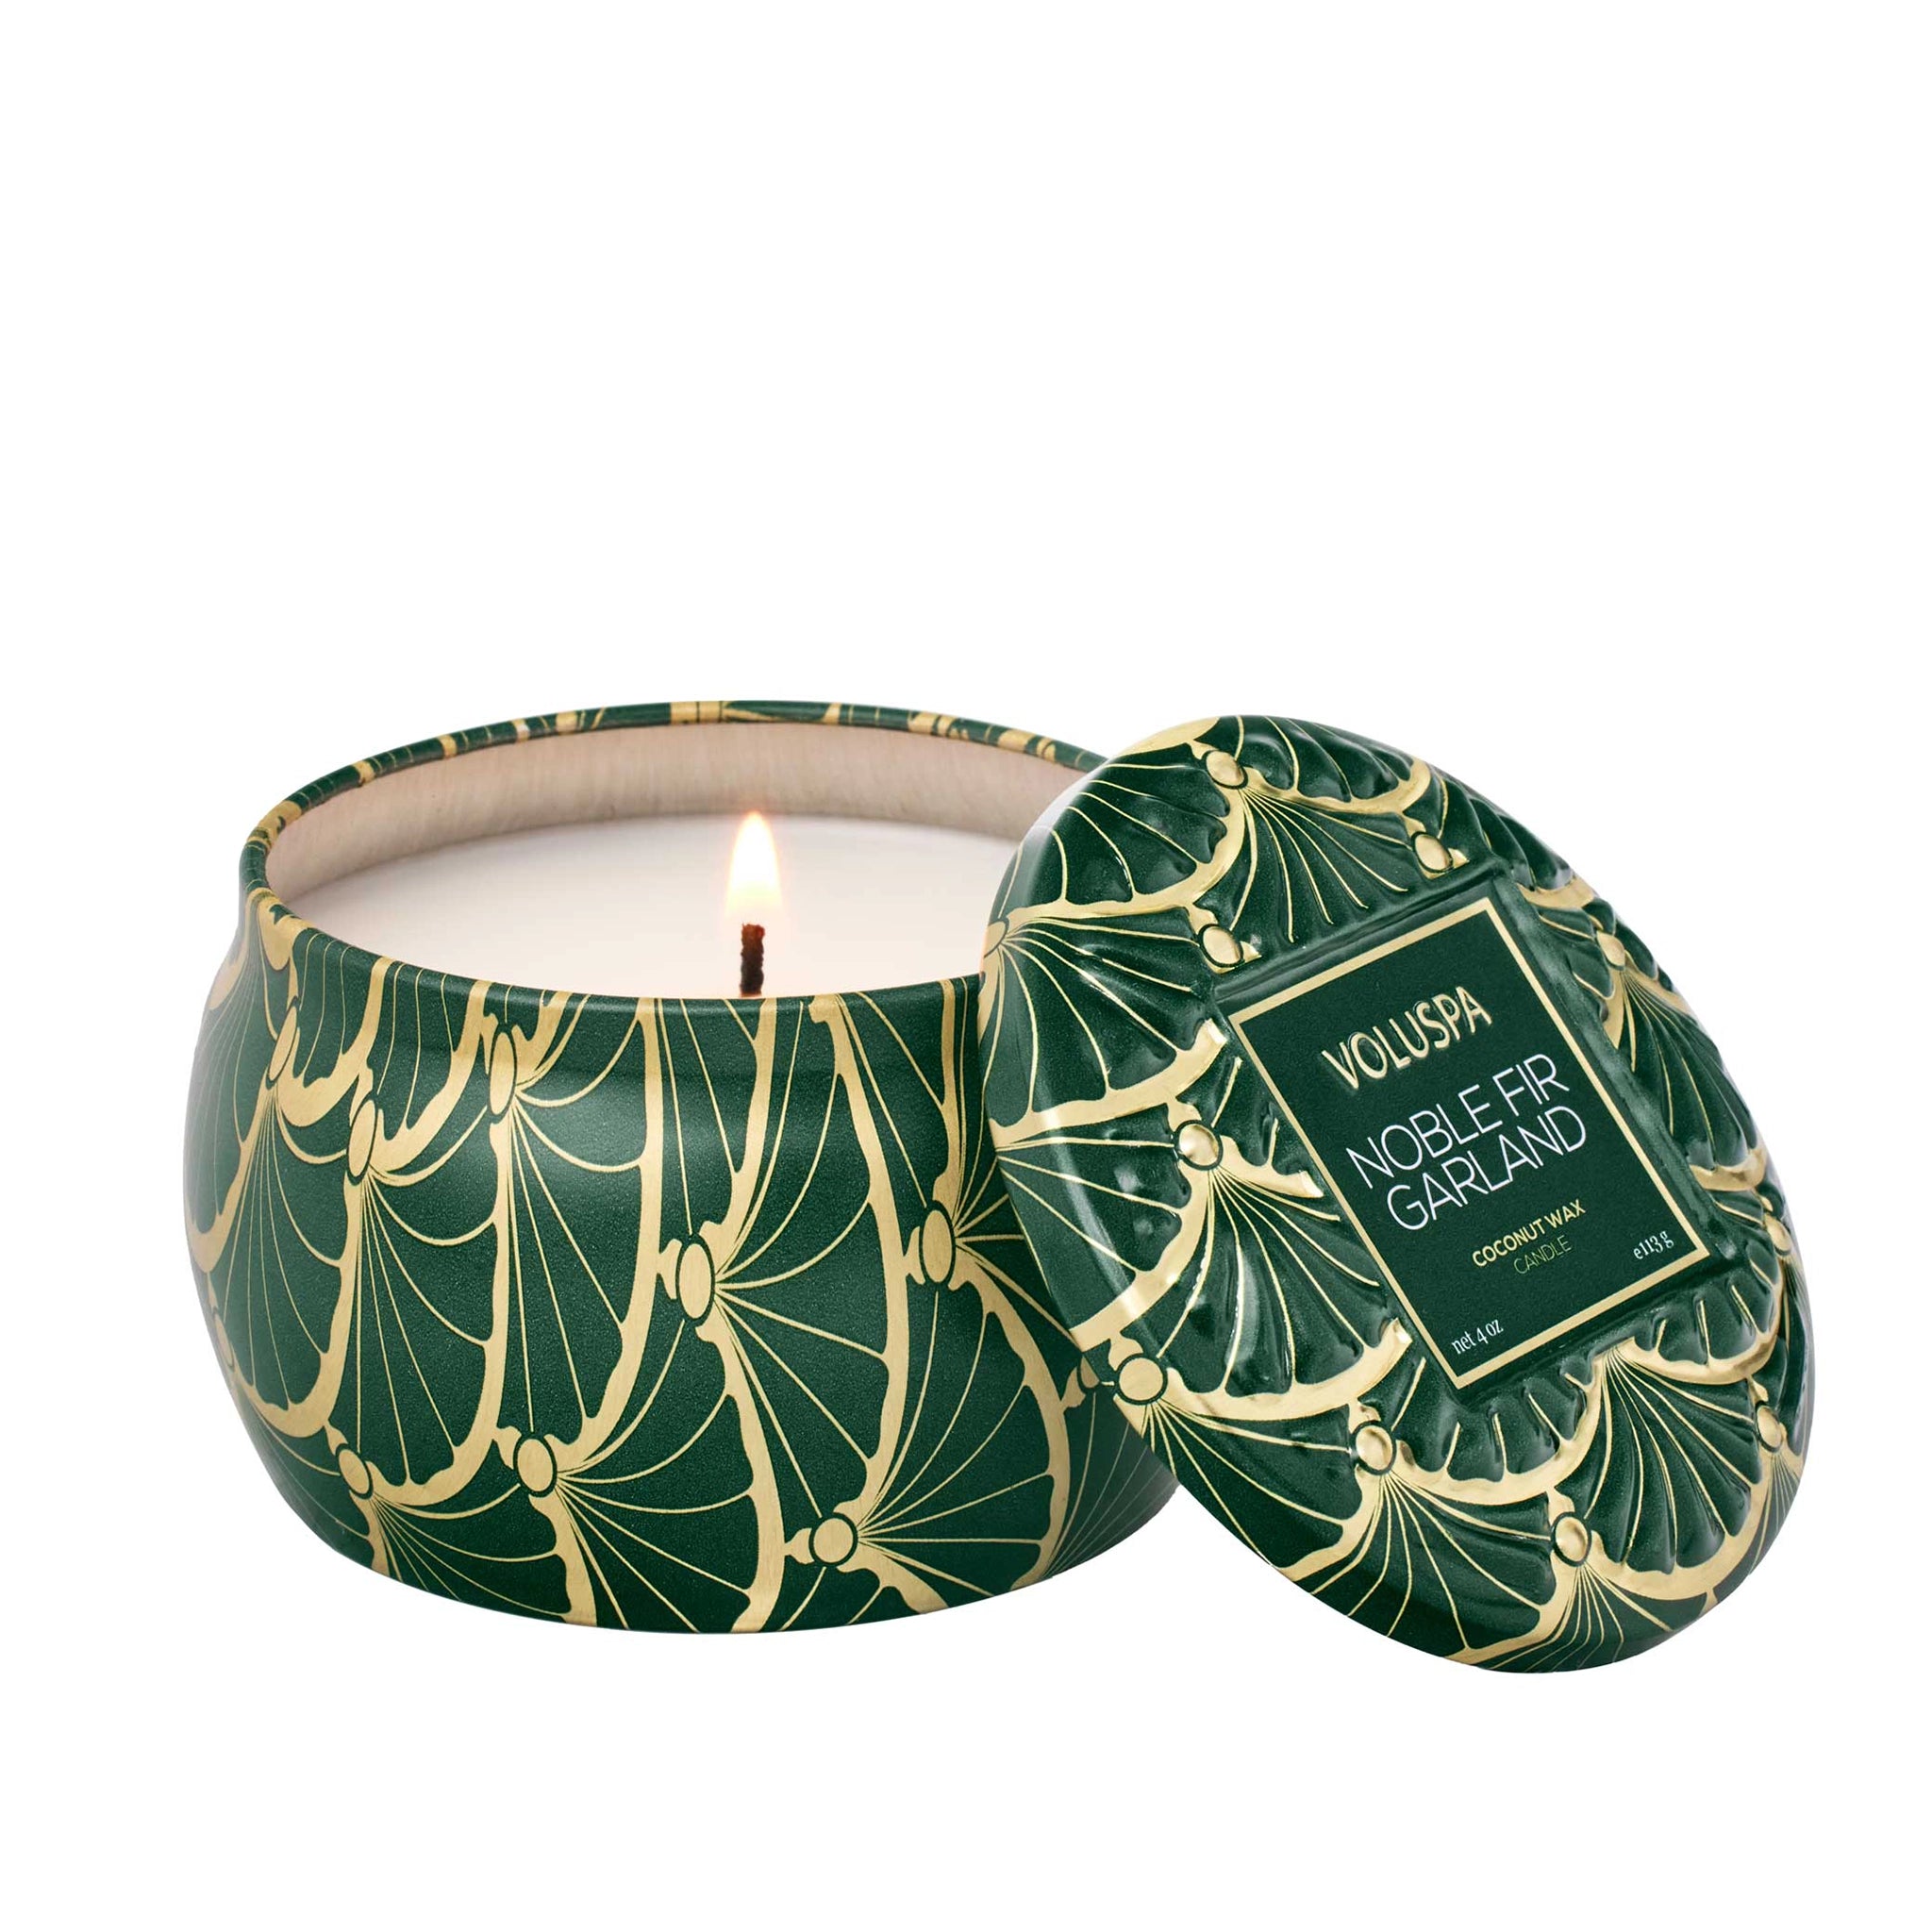 On a white background is a green and gold tin candle with white wax and a single wick as well as a label on the lid that reads, "Noble Fir Garland". 